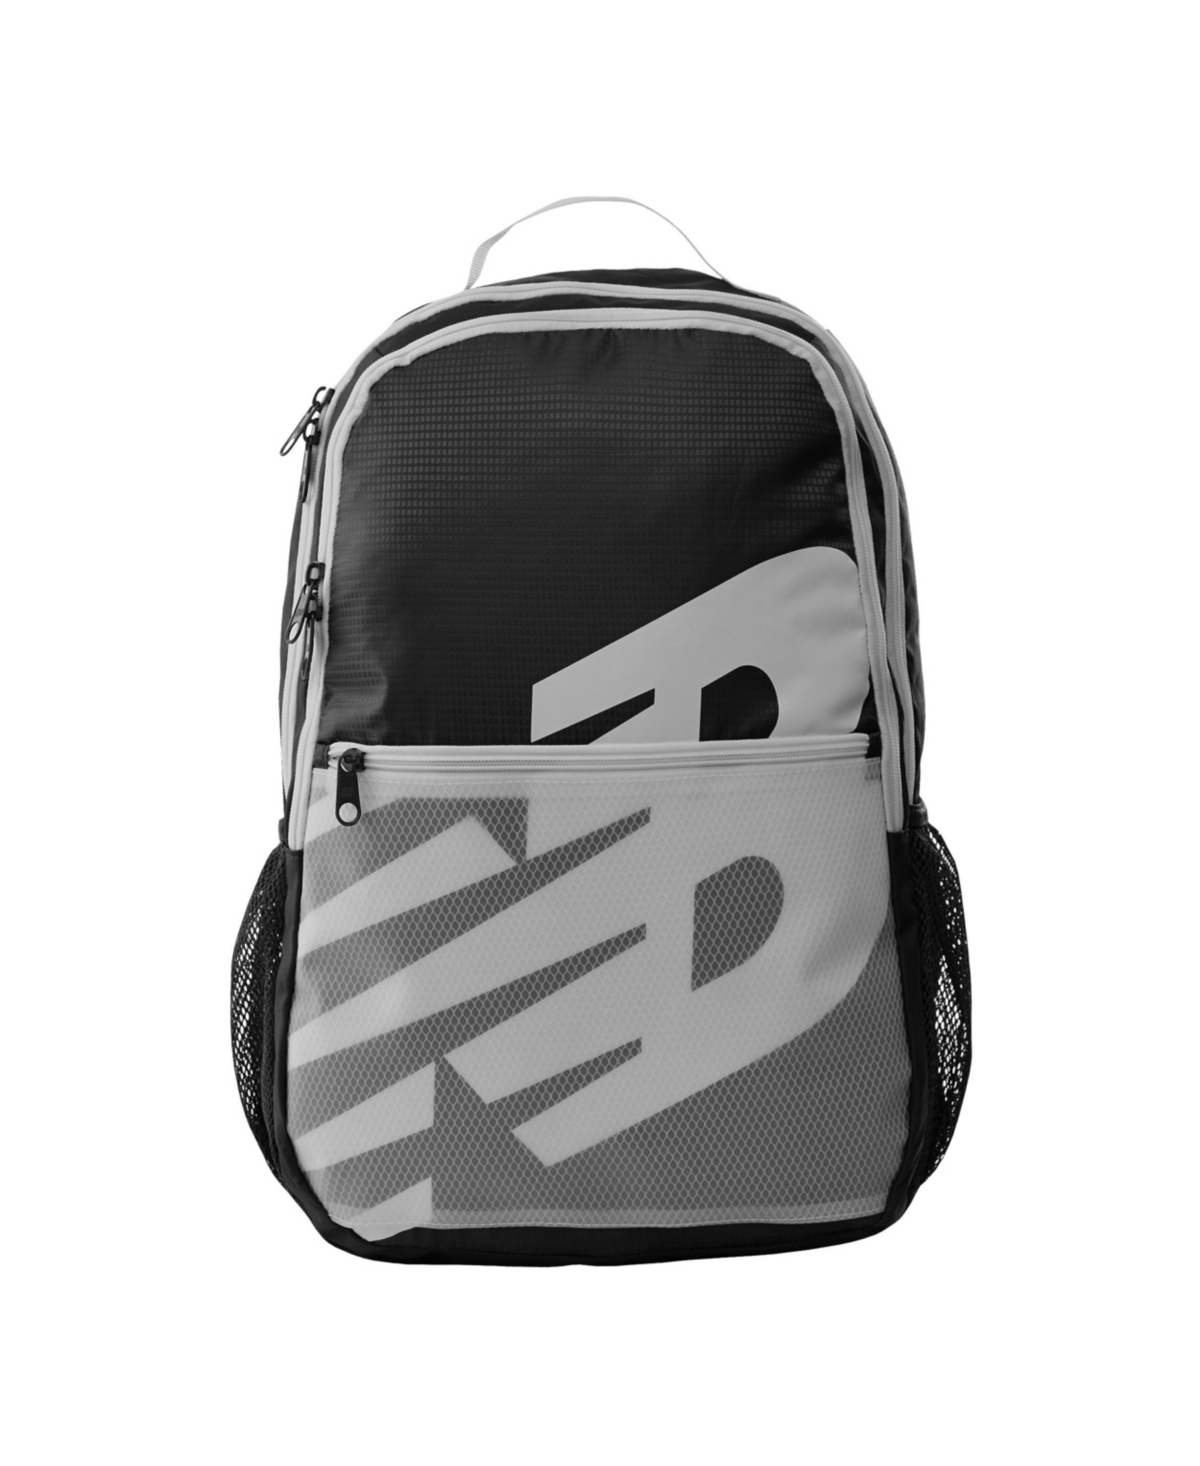 New Balance Core Performance Backpack Advance In Black